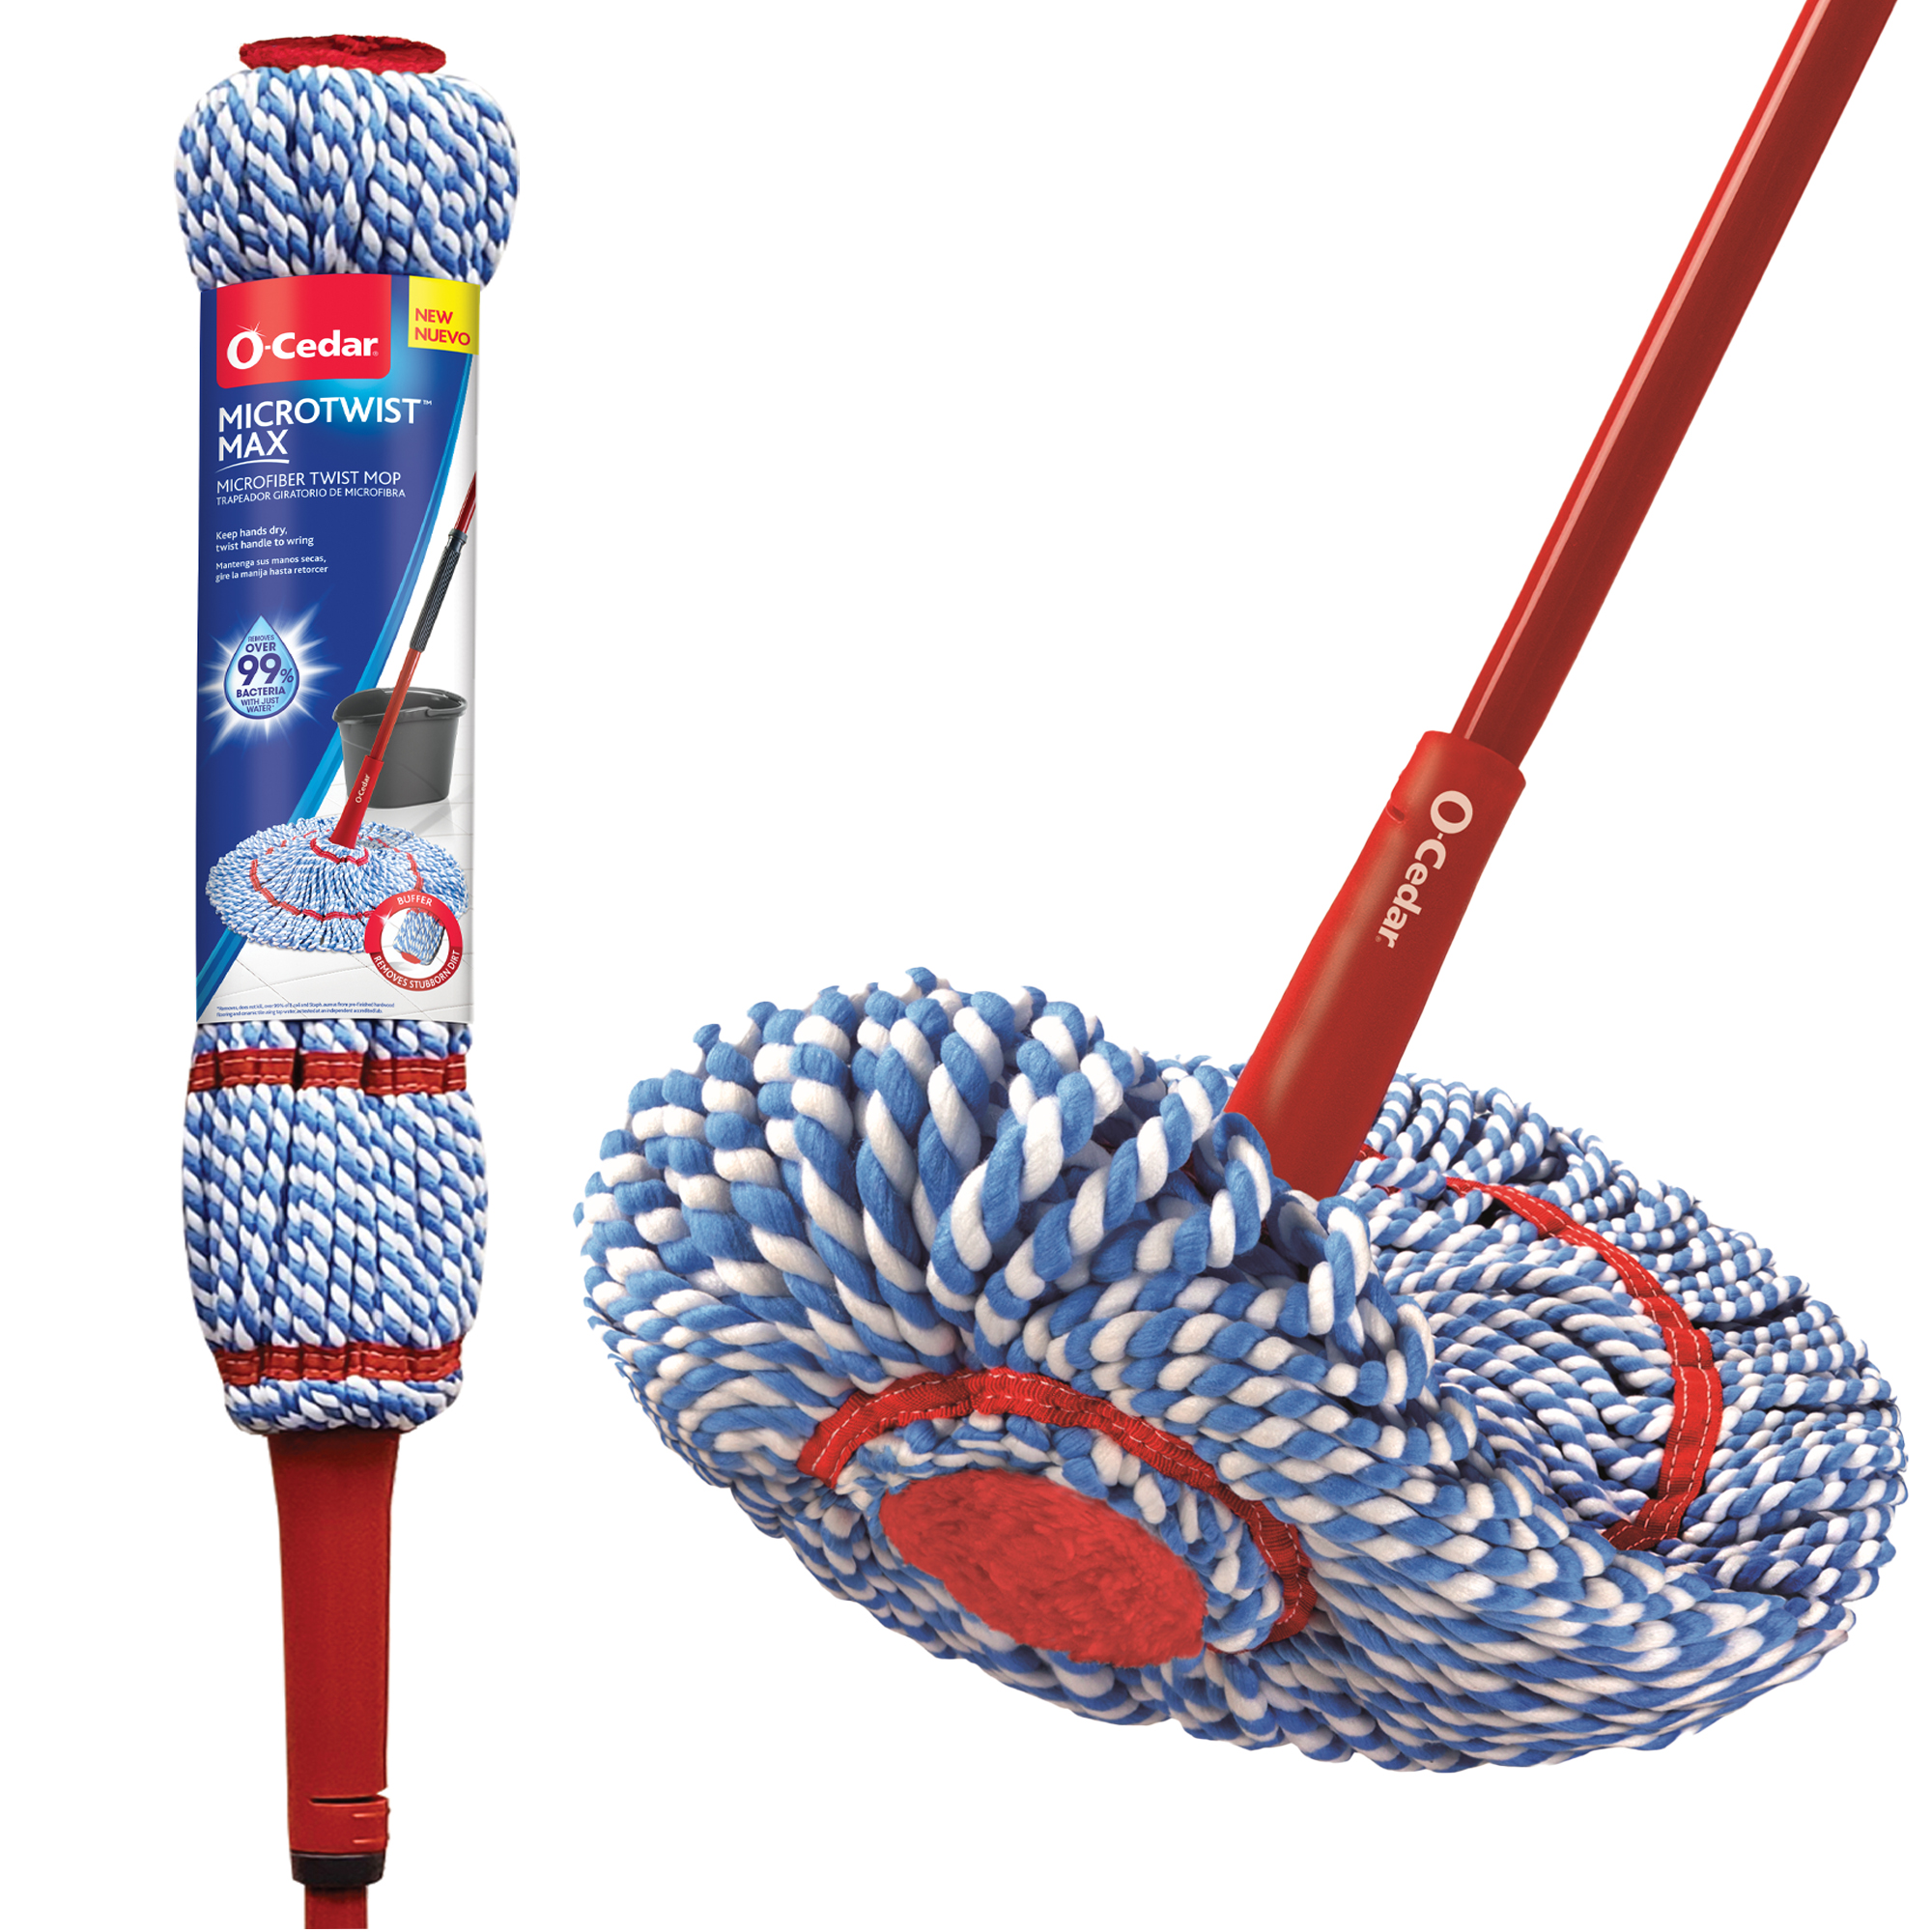 O-Cedar MicroTwist™ MAX Microfiber Mop, Removes 99% of Bacteria with Just Water - image 1 of 18